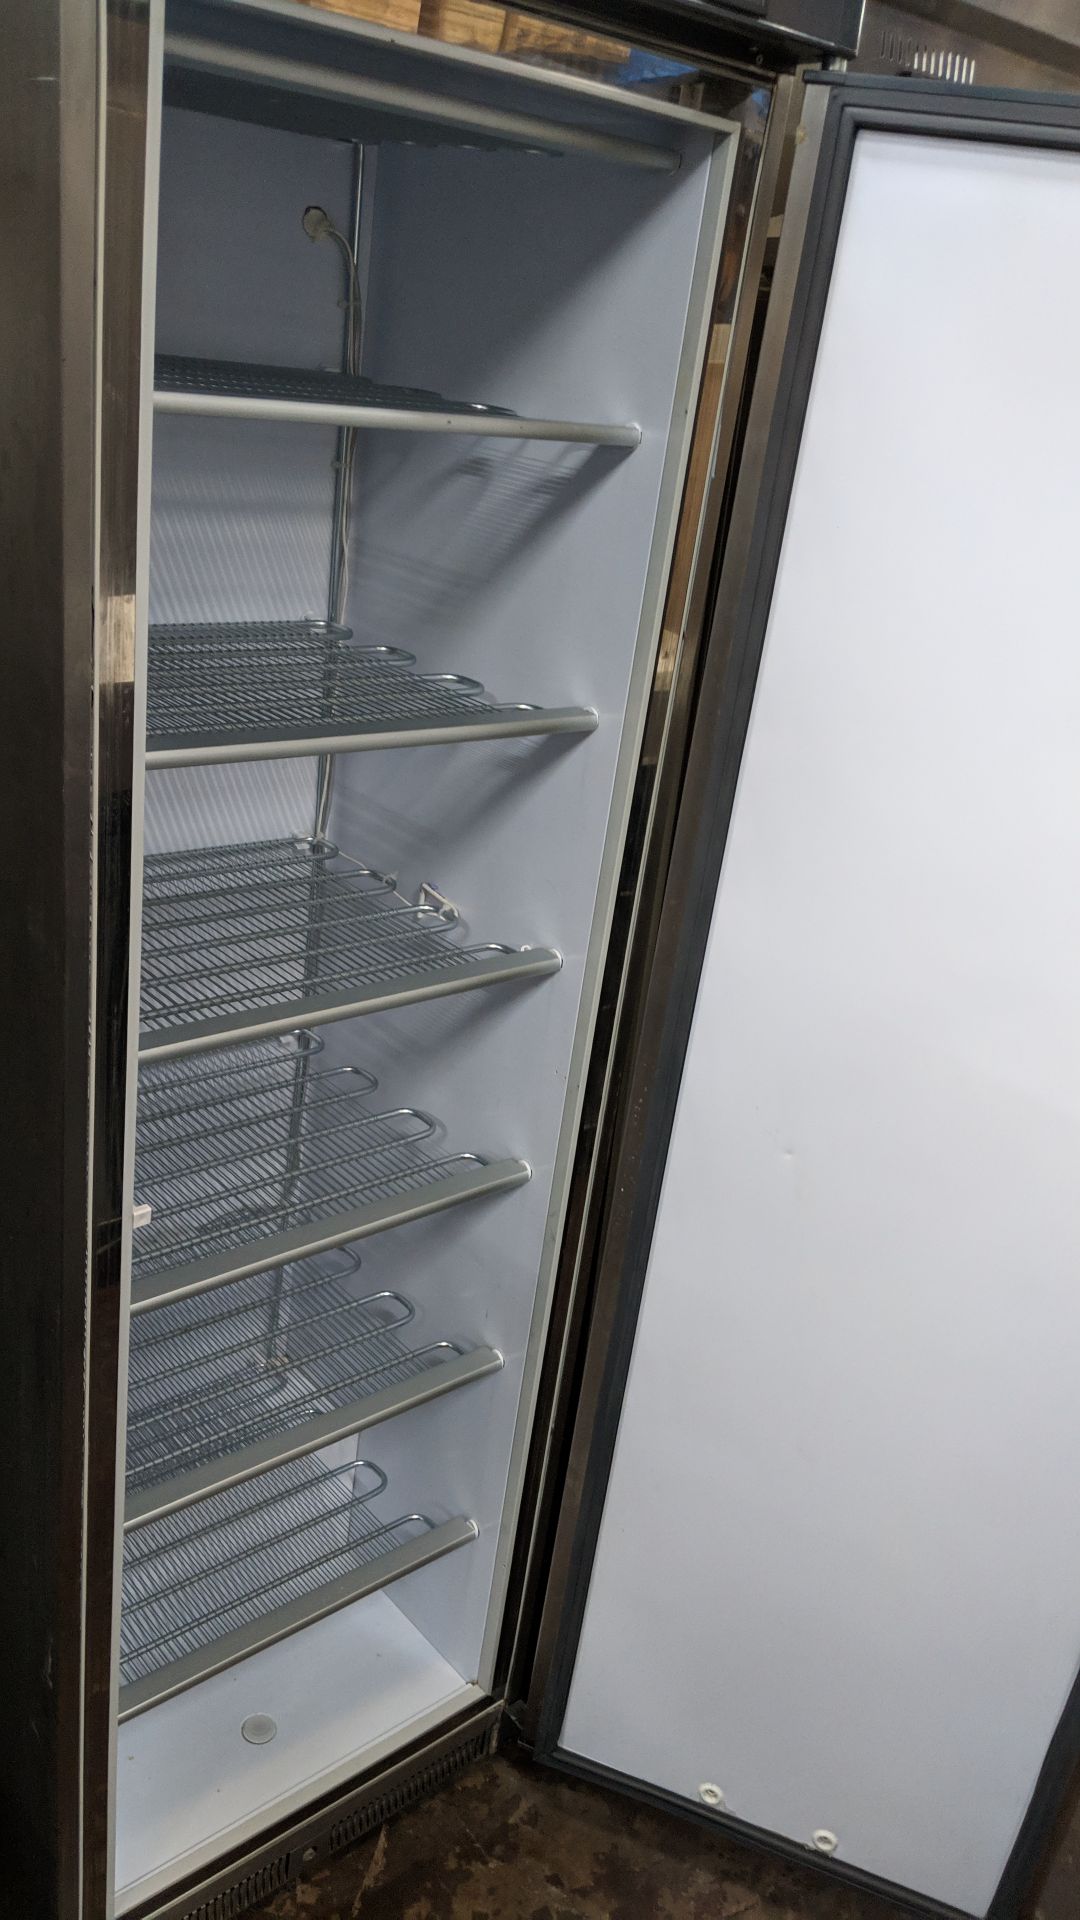 Iarp tall silver freezer, ABX400N IMPORTANT: Please remember goods successfully bid upon must be - Image 2 of 3